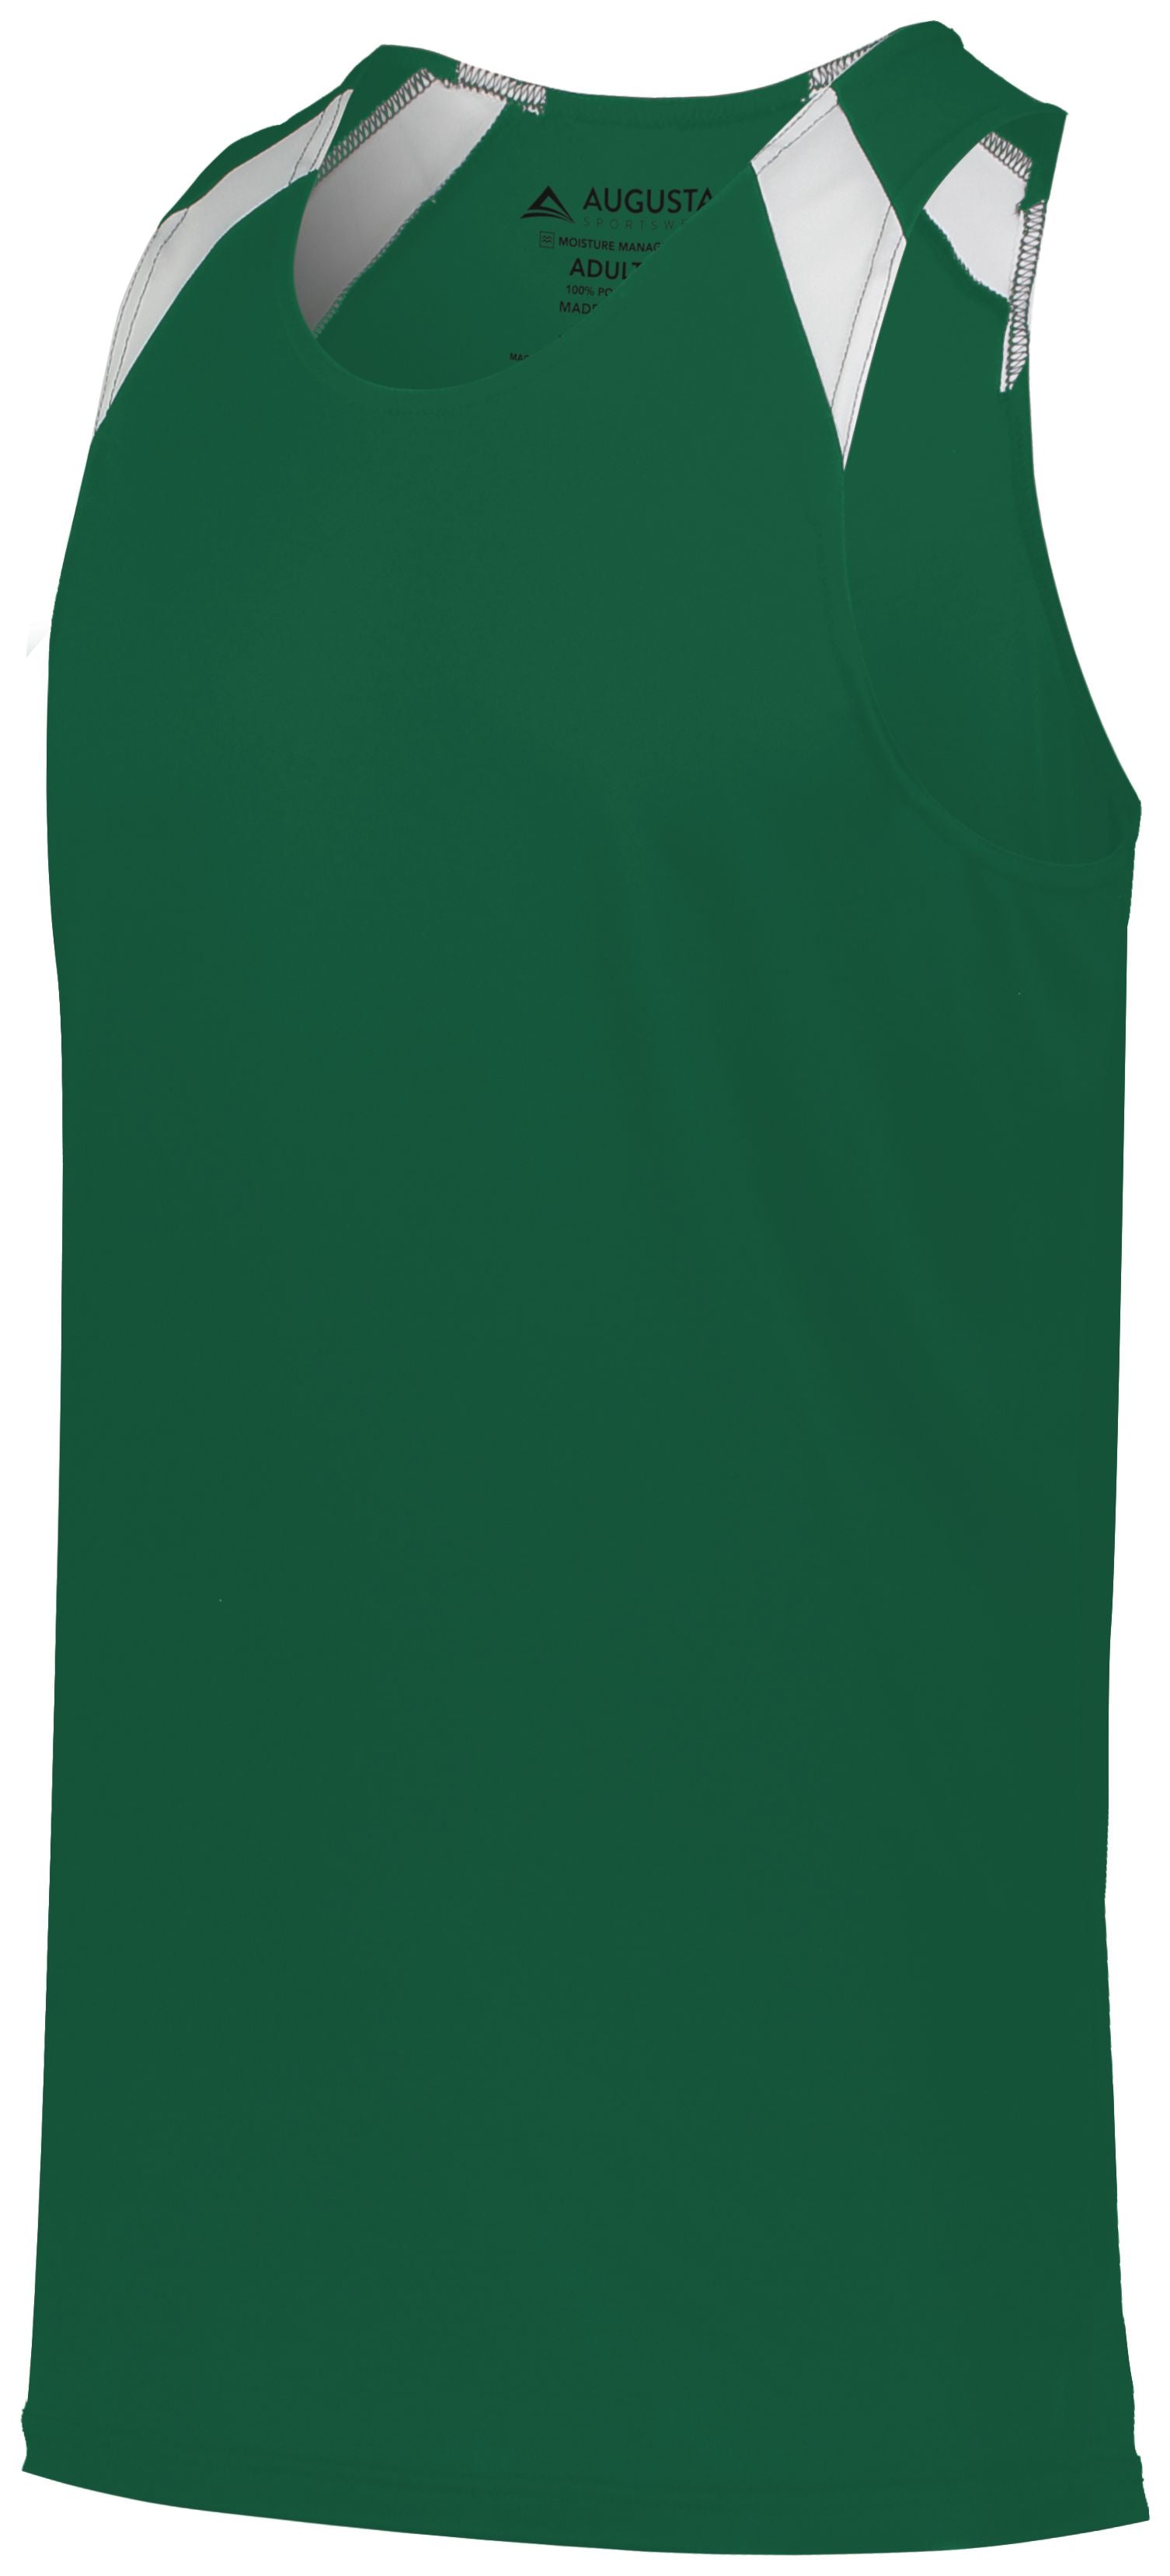 Augusta Sportswear Overspeed Track Jersey in Dark Green/White  -Part of the Adult, Adult-Jersey, Augusta-Products, Track-Field, Shirts product lines at KanaleyCreations.com